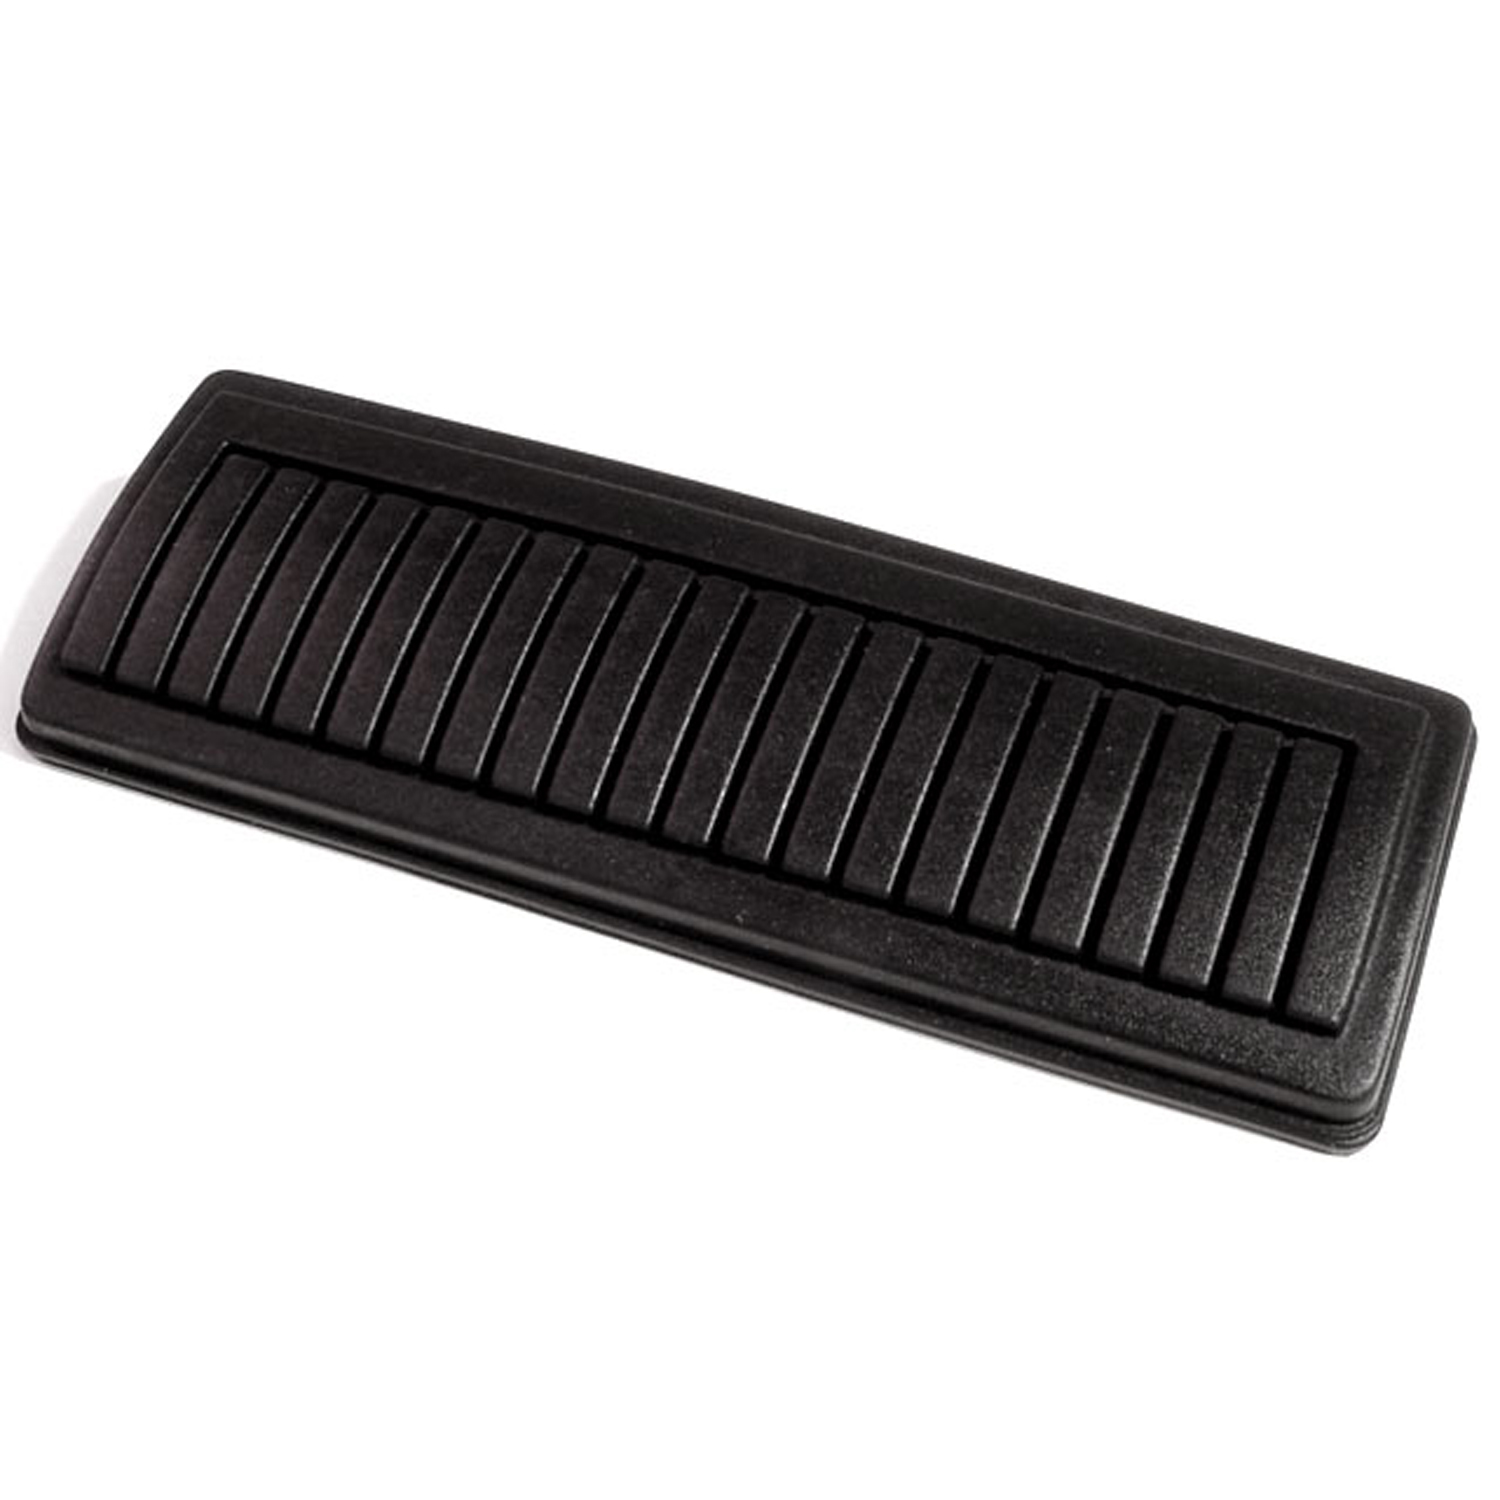 1968 Dodge Charger Brake Pedal Pad, for models with automatic transmission-CB 200